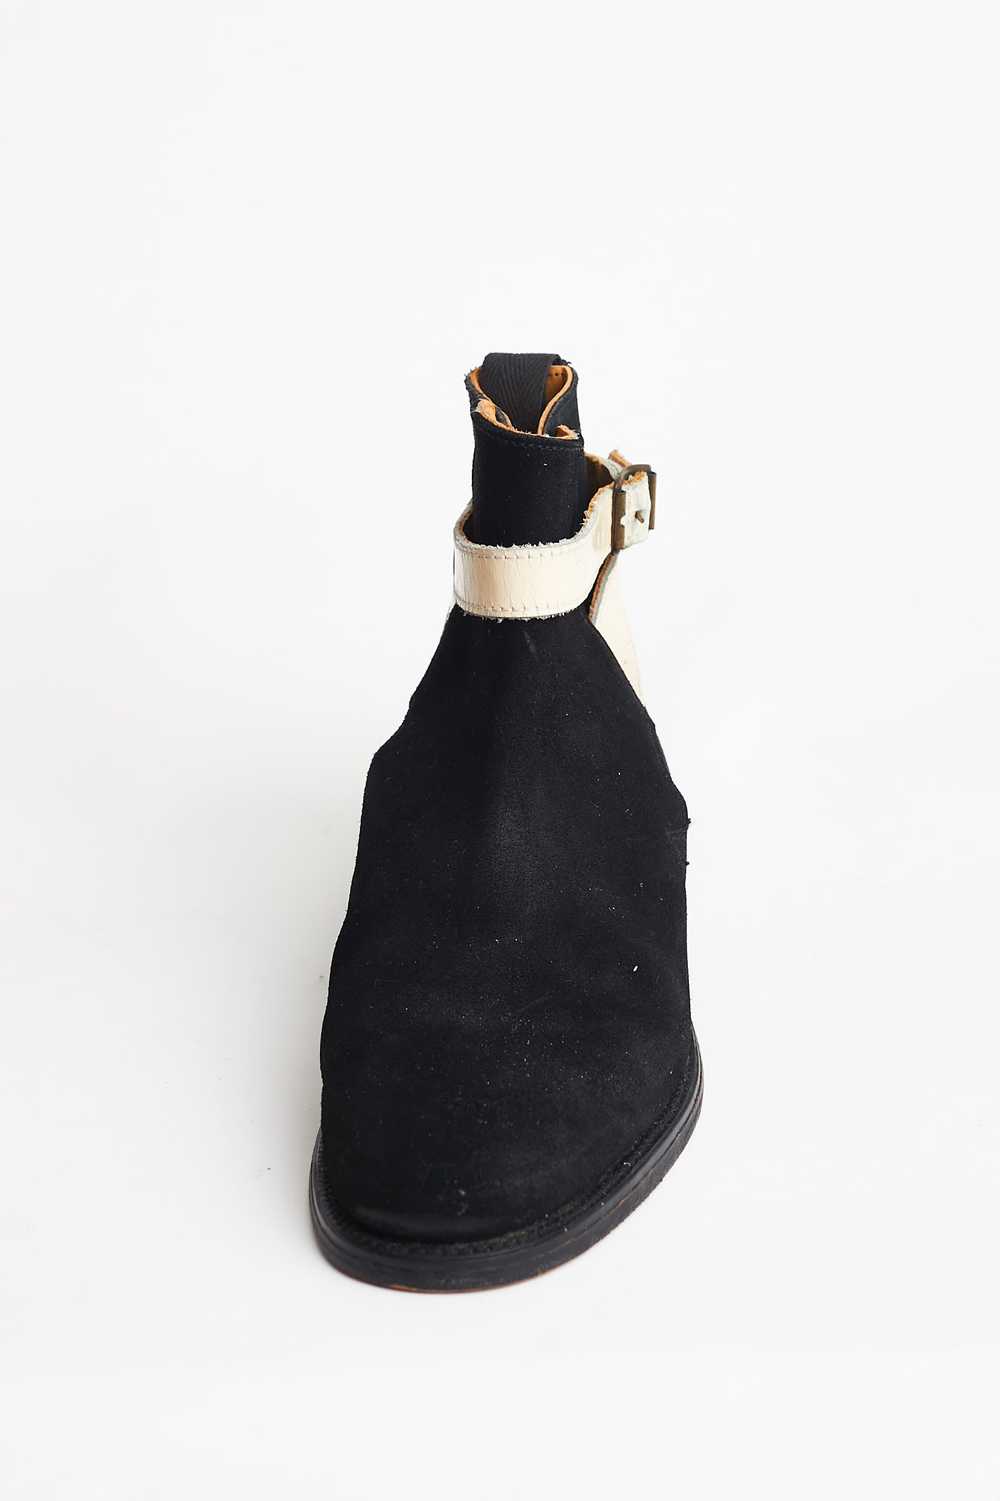 Vivienne Westwood 70's Sex suede Pirate boots - image 4